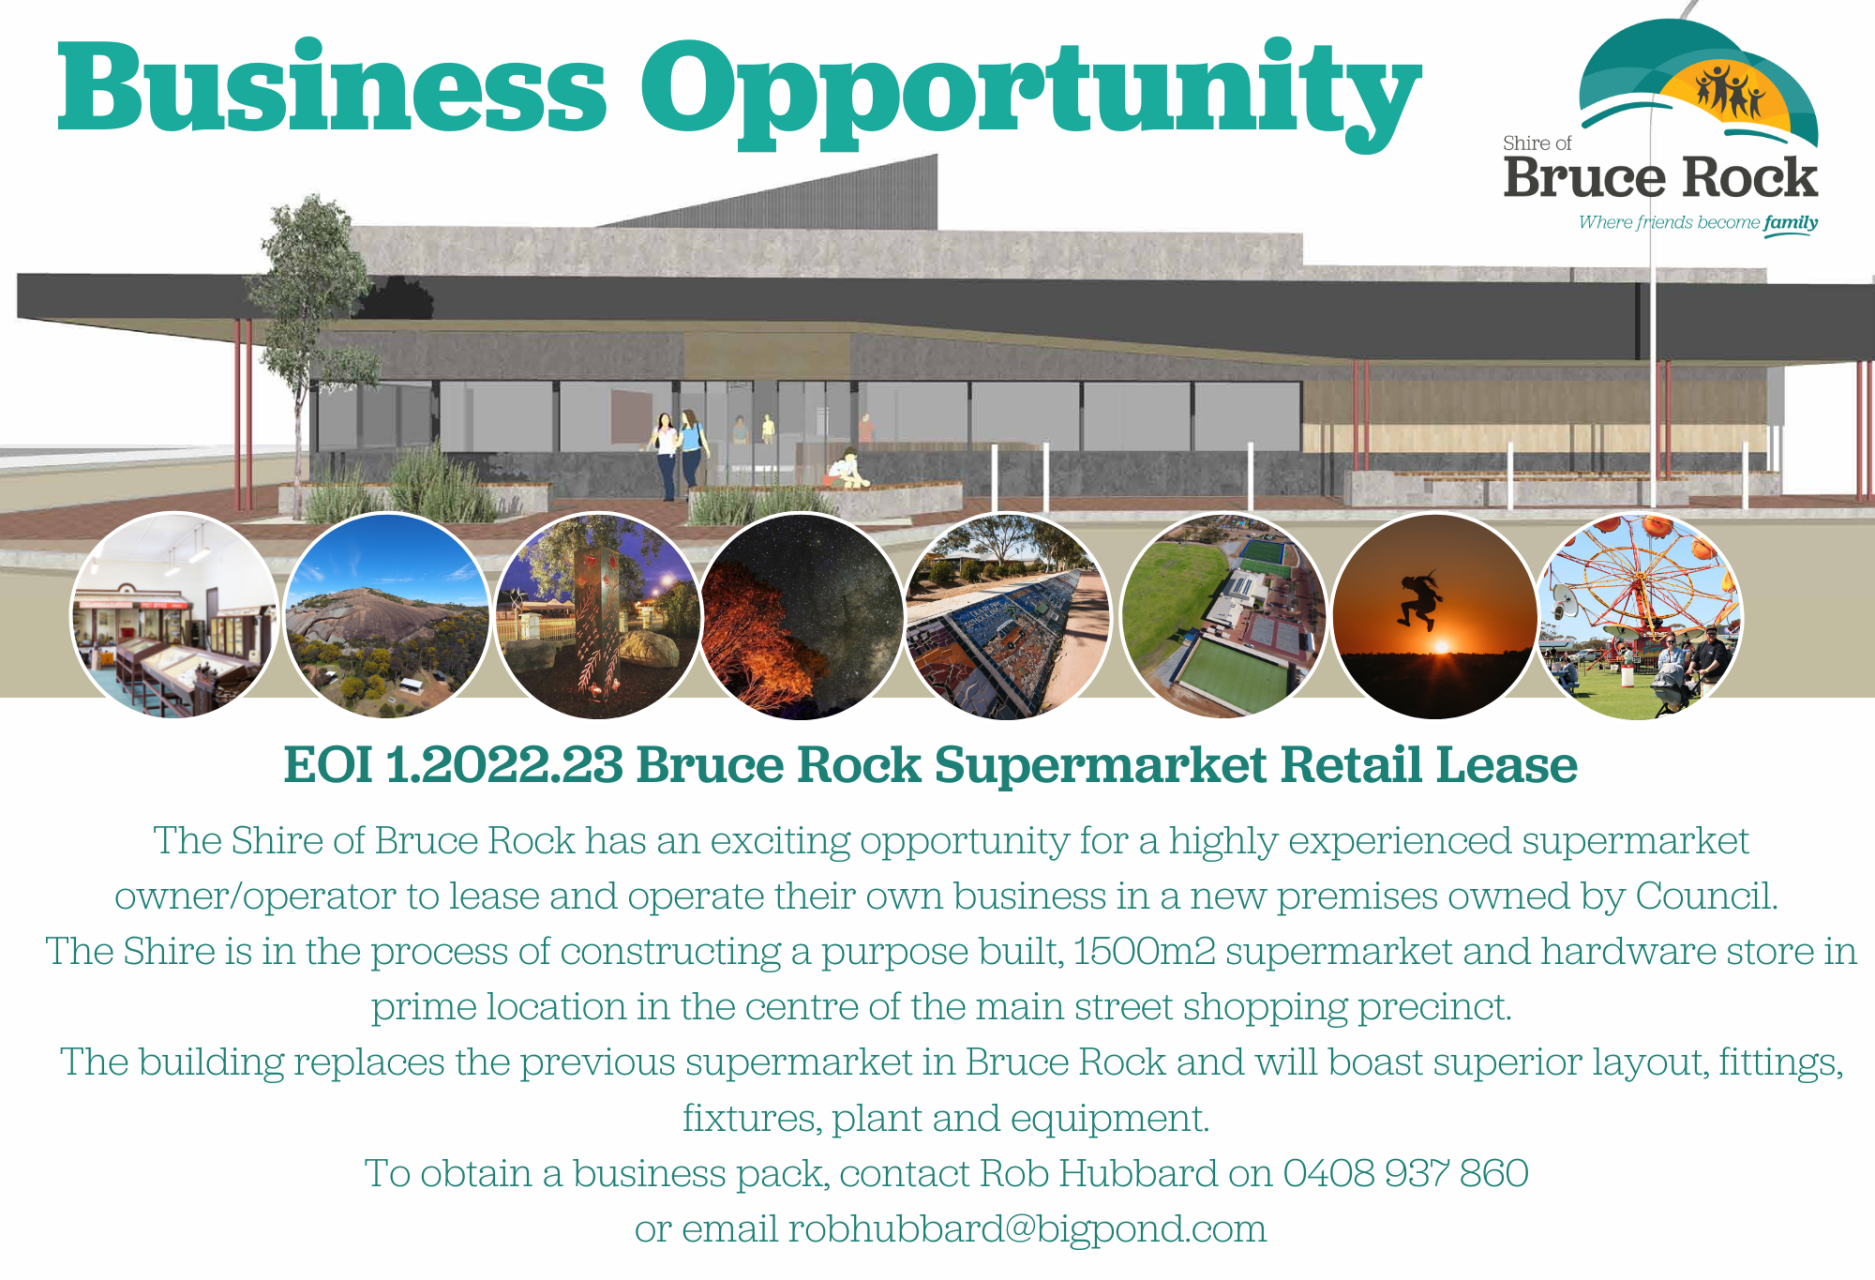 Business Opportunity - Supermarket Retail Lease